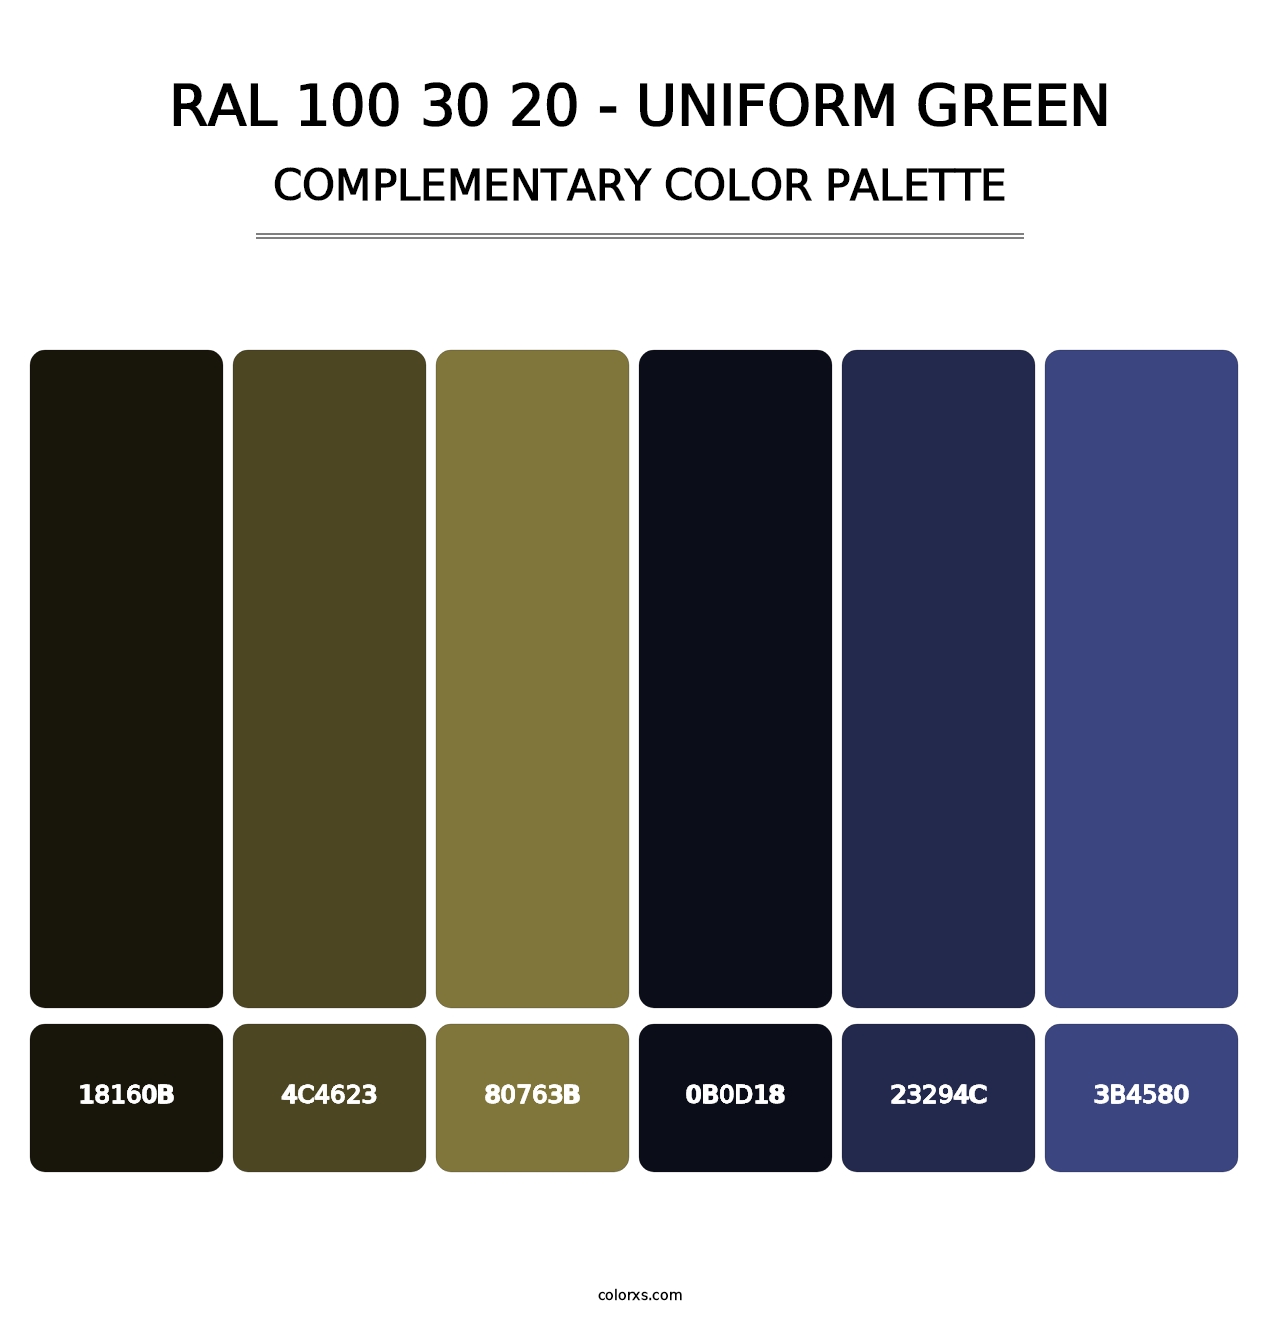 RAL 100 30 20 - Uniform Green - Complementary Color Palette